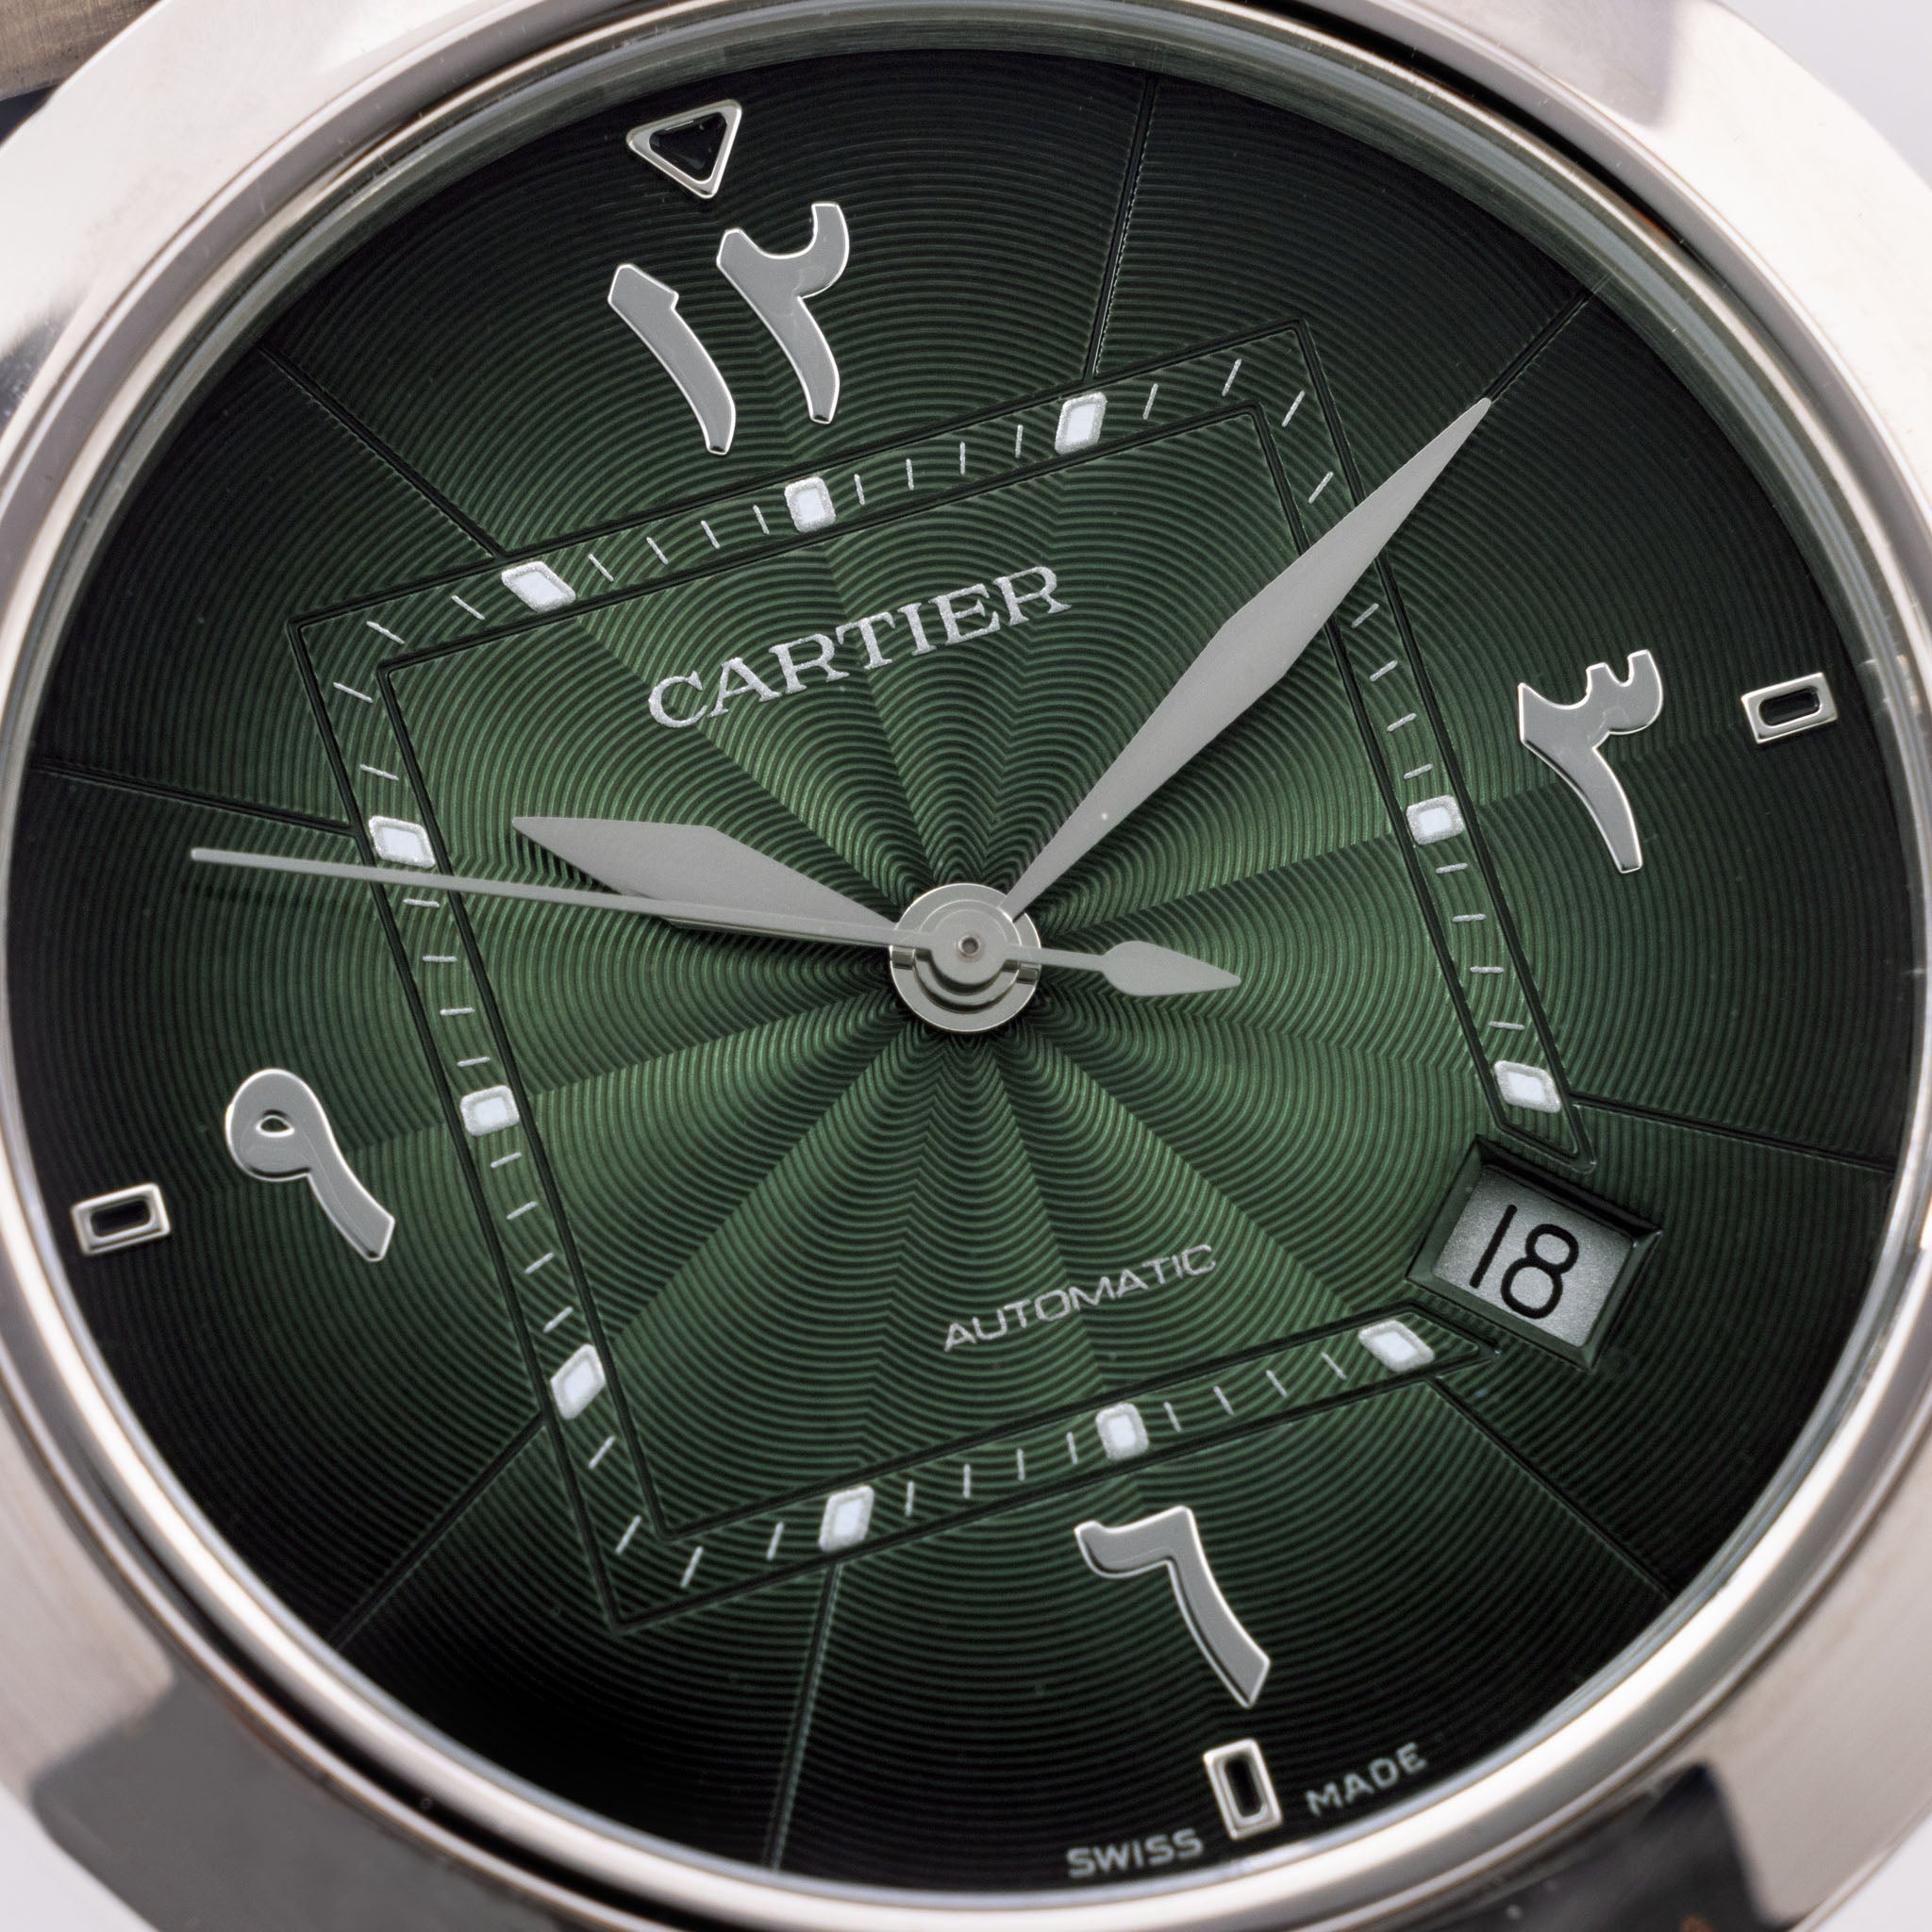 Cartier Pasha Green Middle East limited Edition with Warrantee Card 